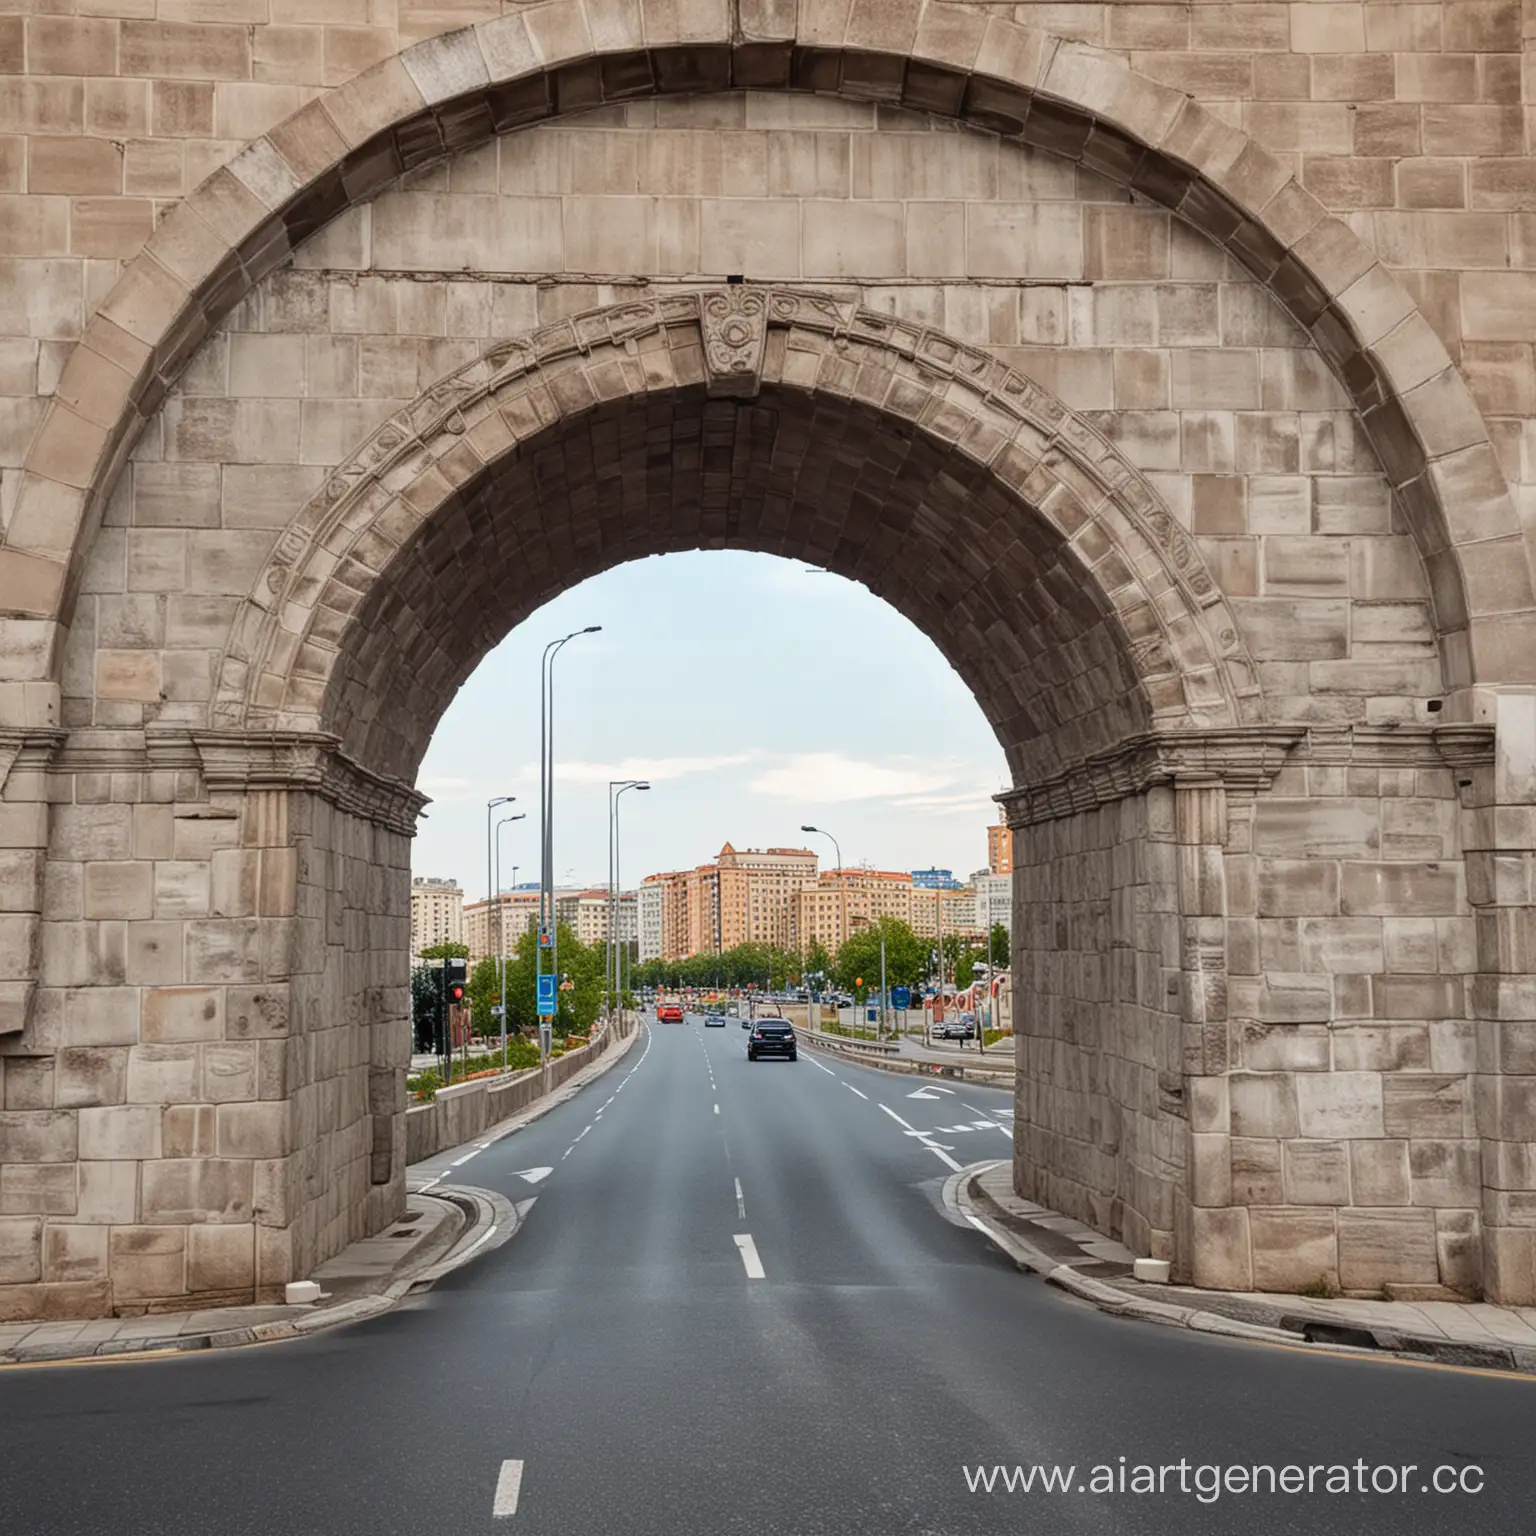 Historic-Round-Arch-Entrance-to-City